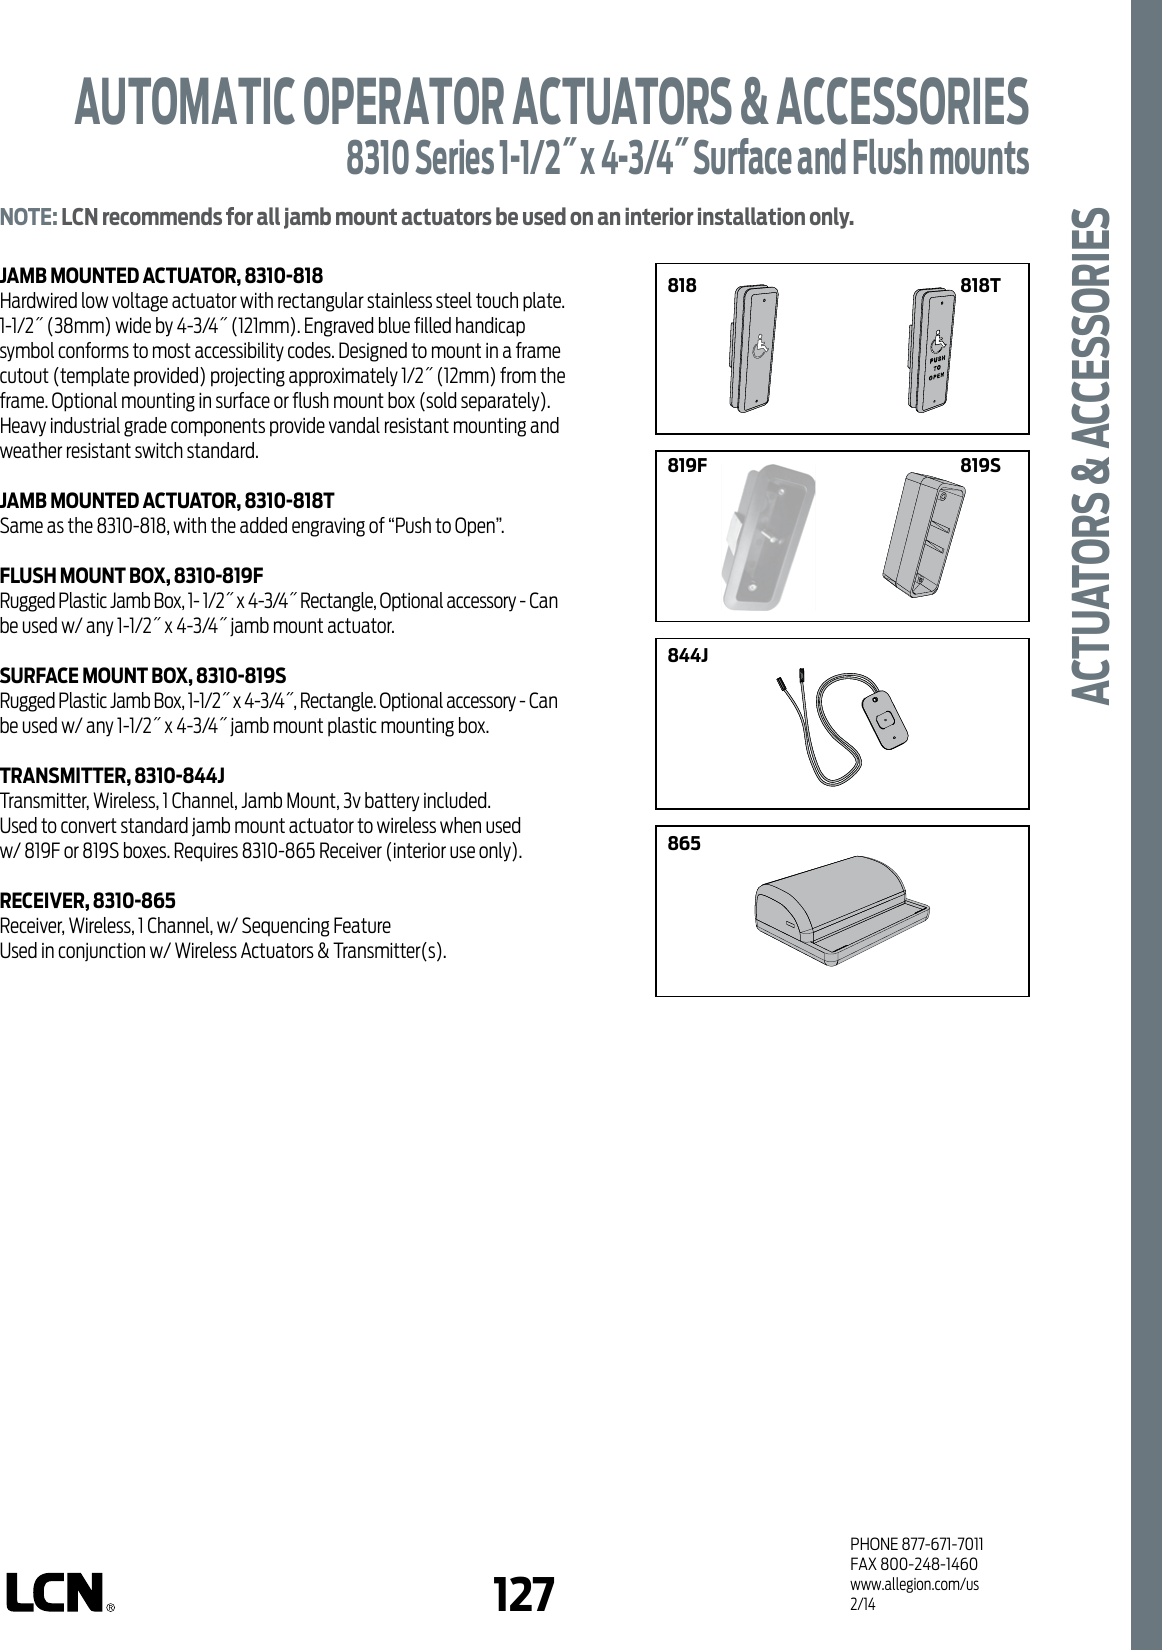 Page 5 of 9 - LCN  8310 Series Automatic Operator Actuators & Accessories Cut Sheet